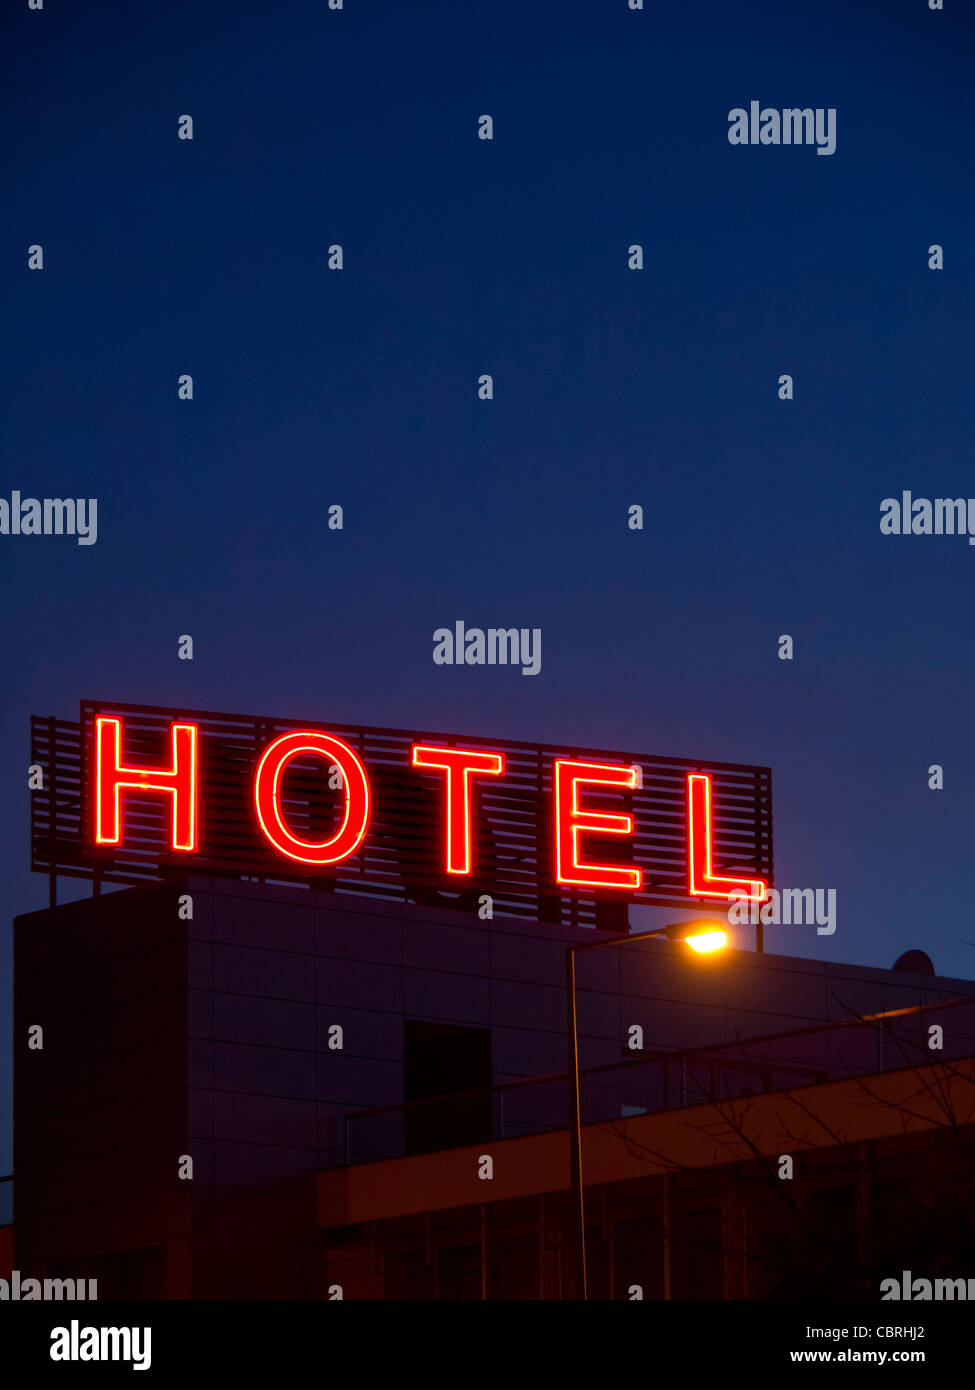 Hotel neon sign by night Stock Photo